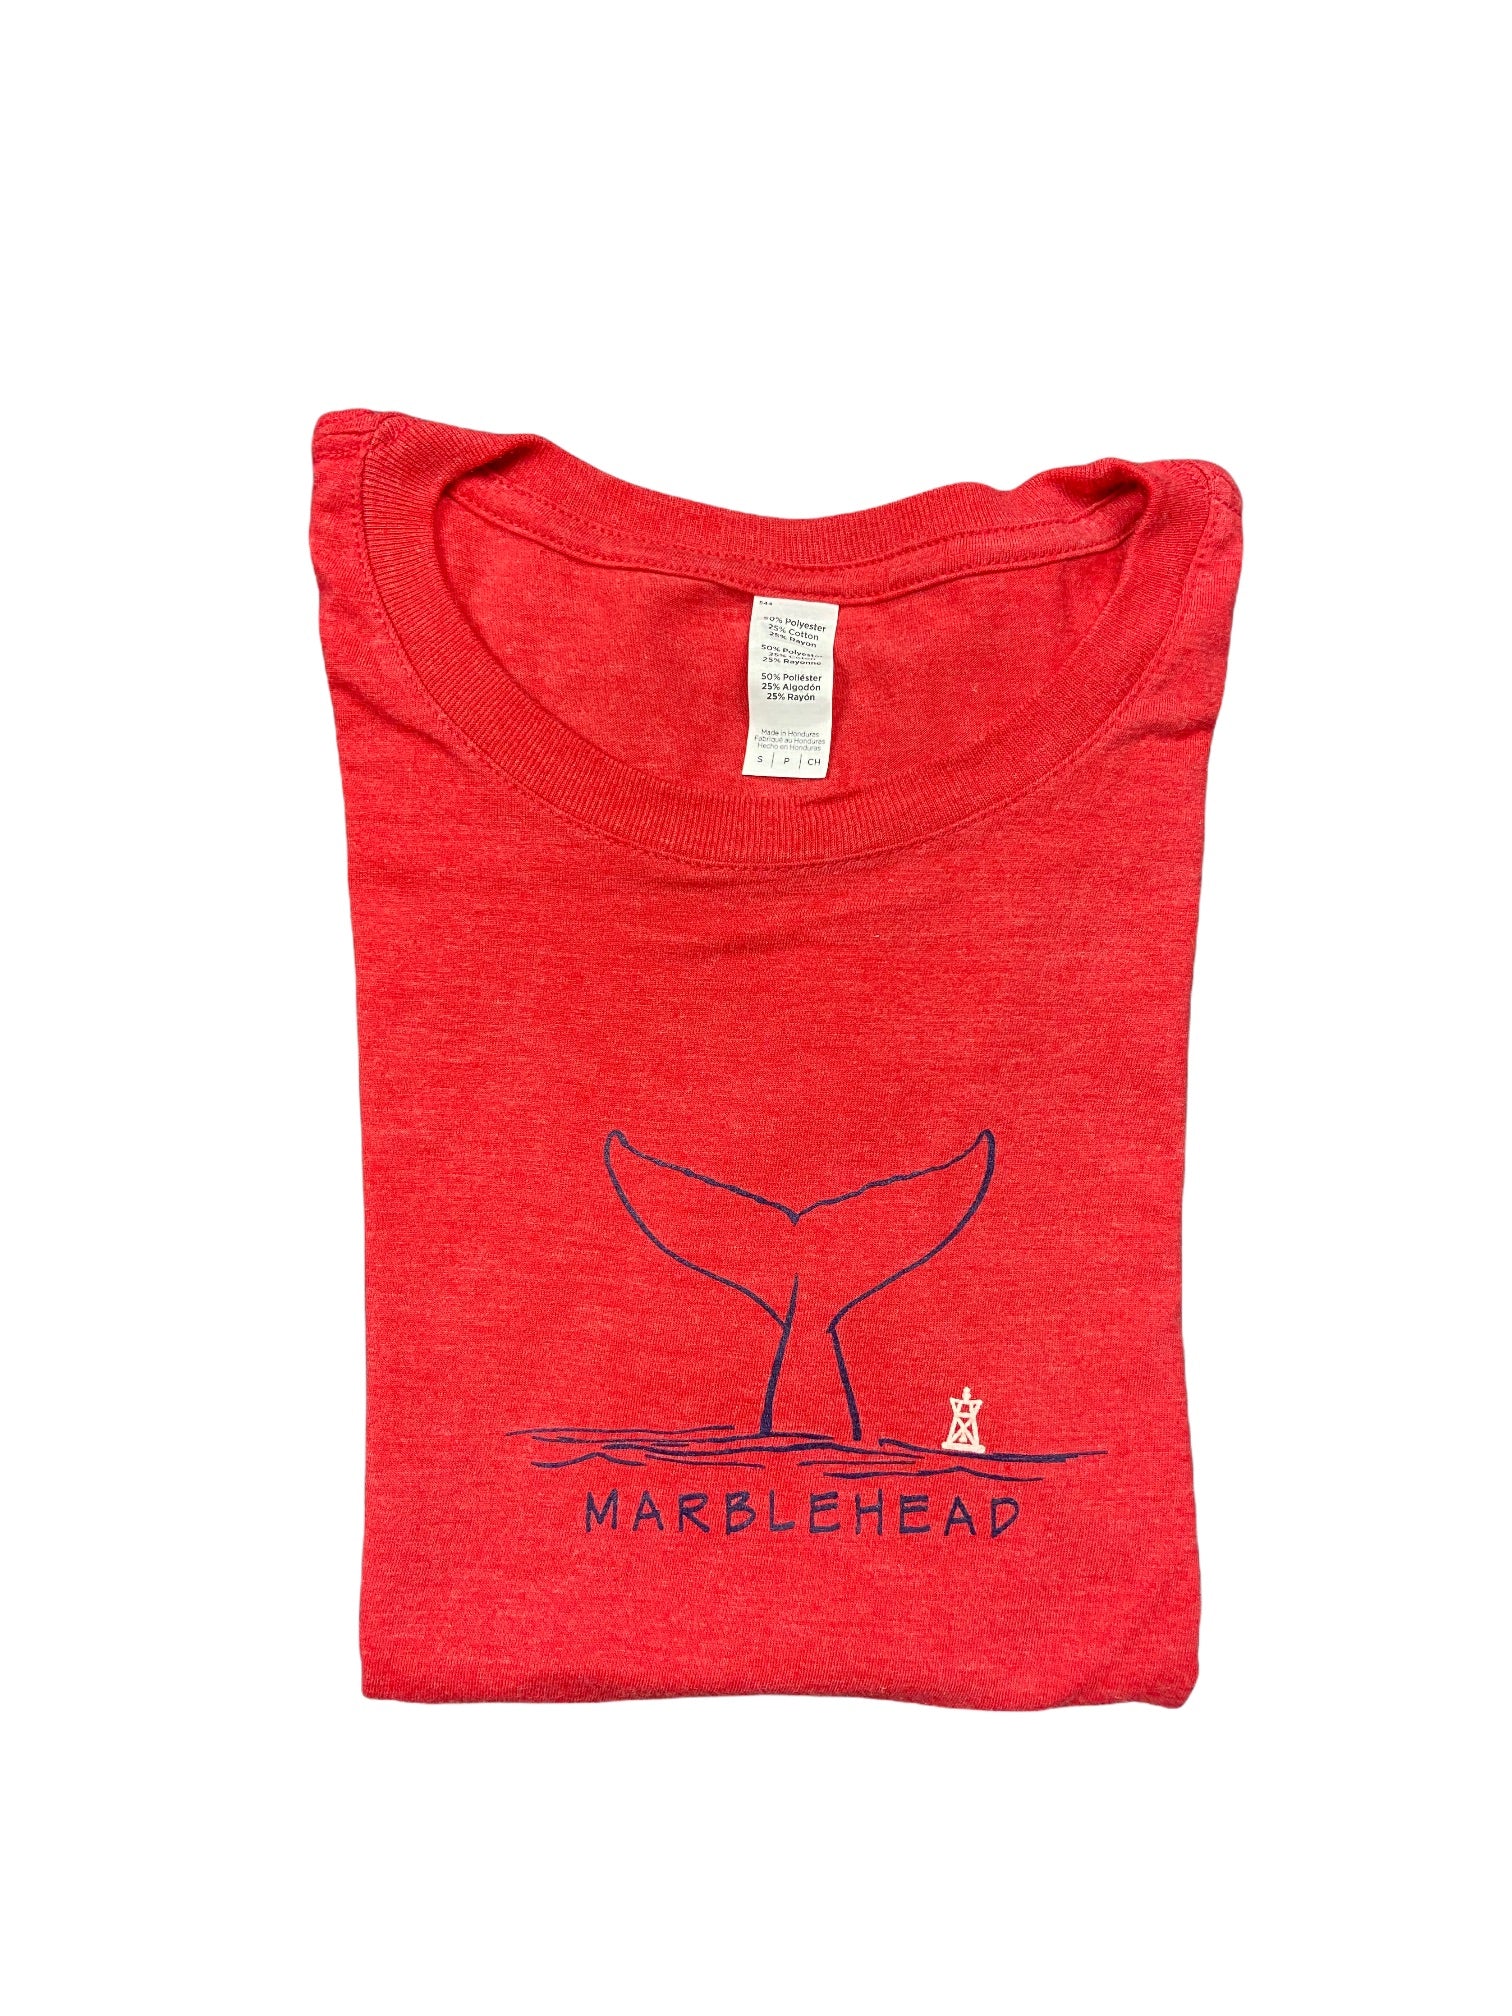 S/S Whale Tail Tee Nautical Red